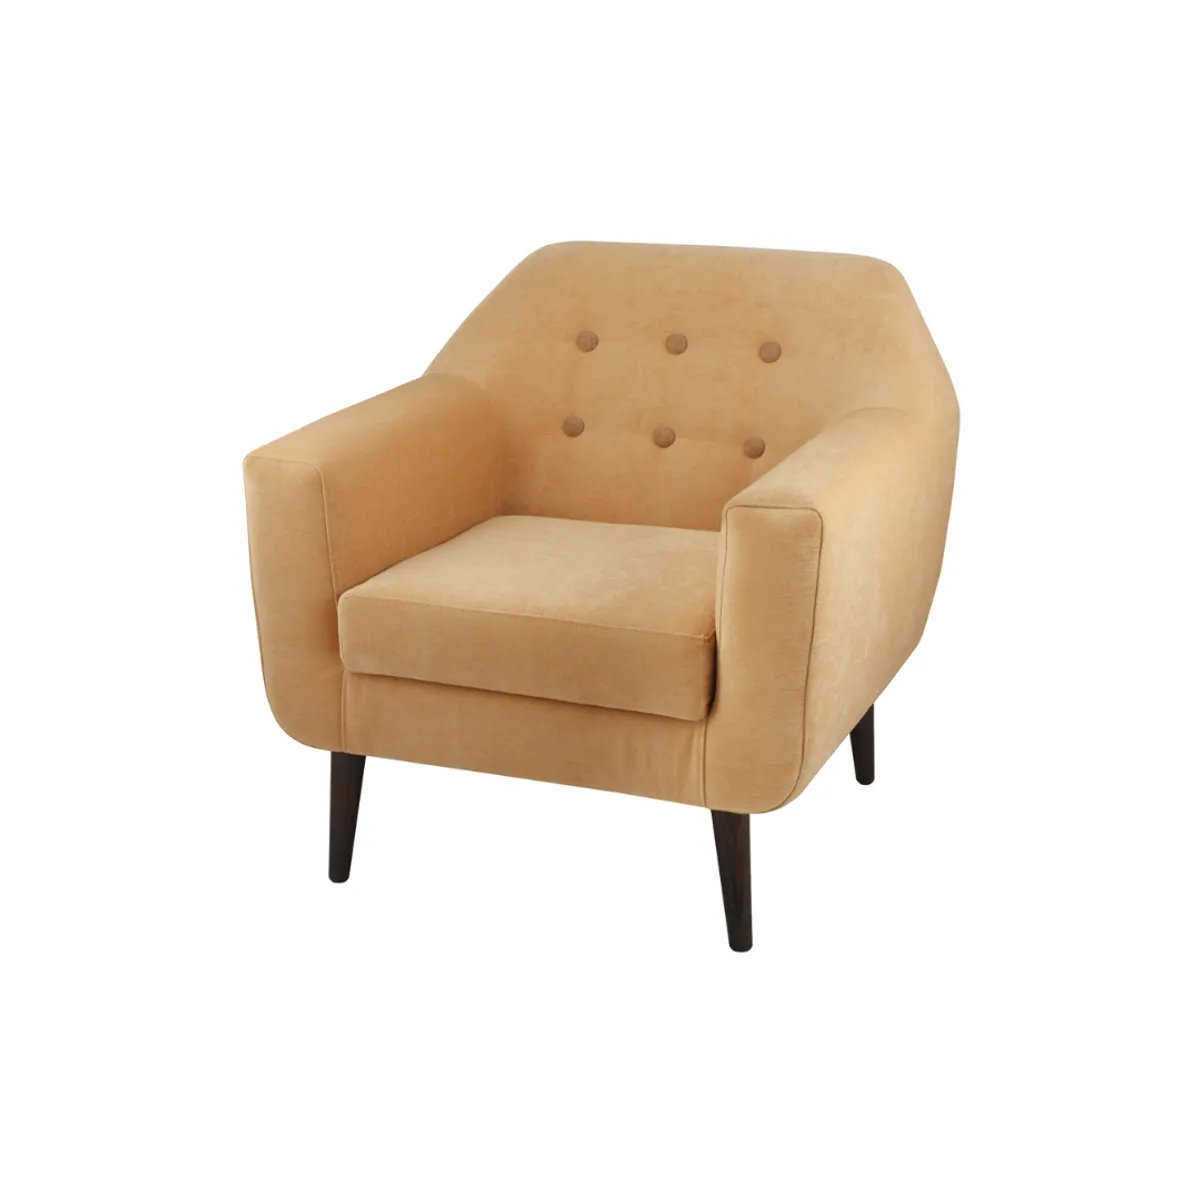 Garbo lounge chair 3